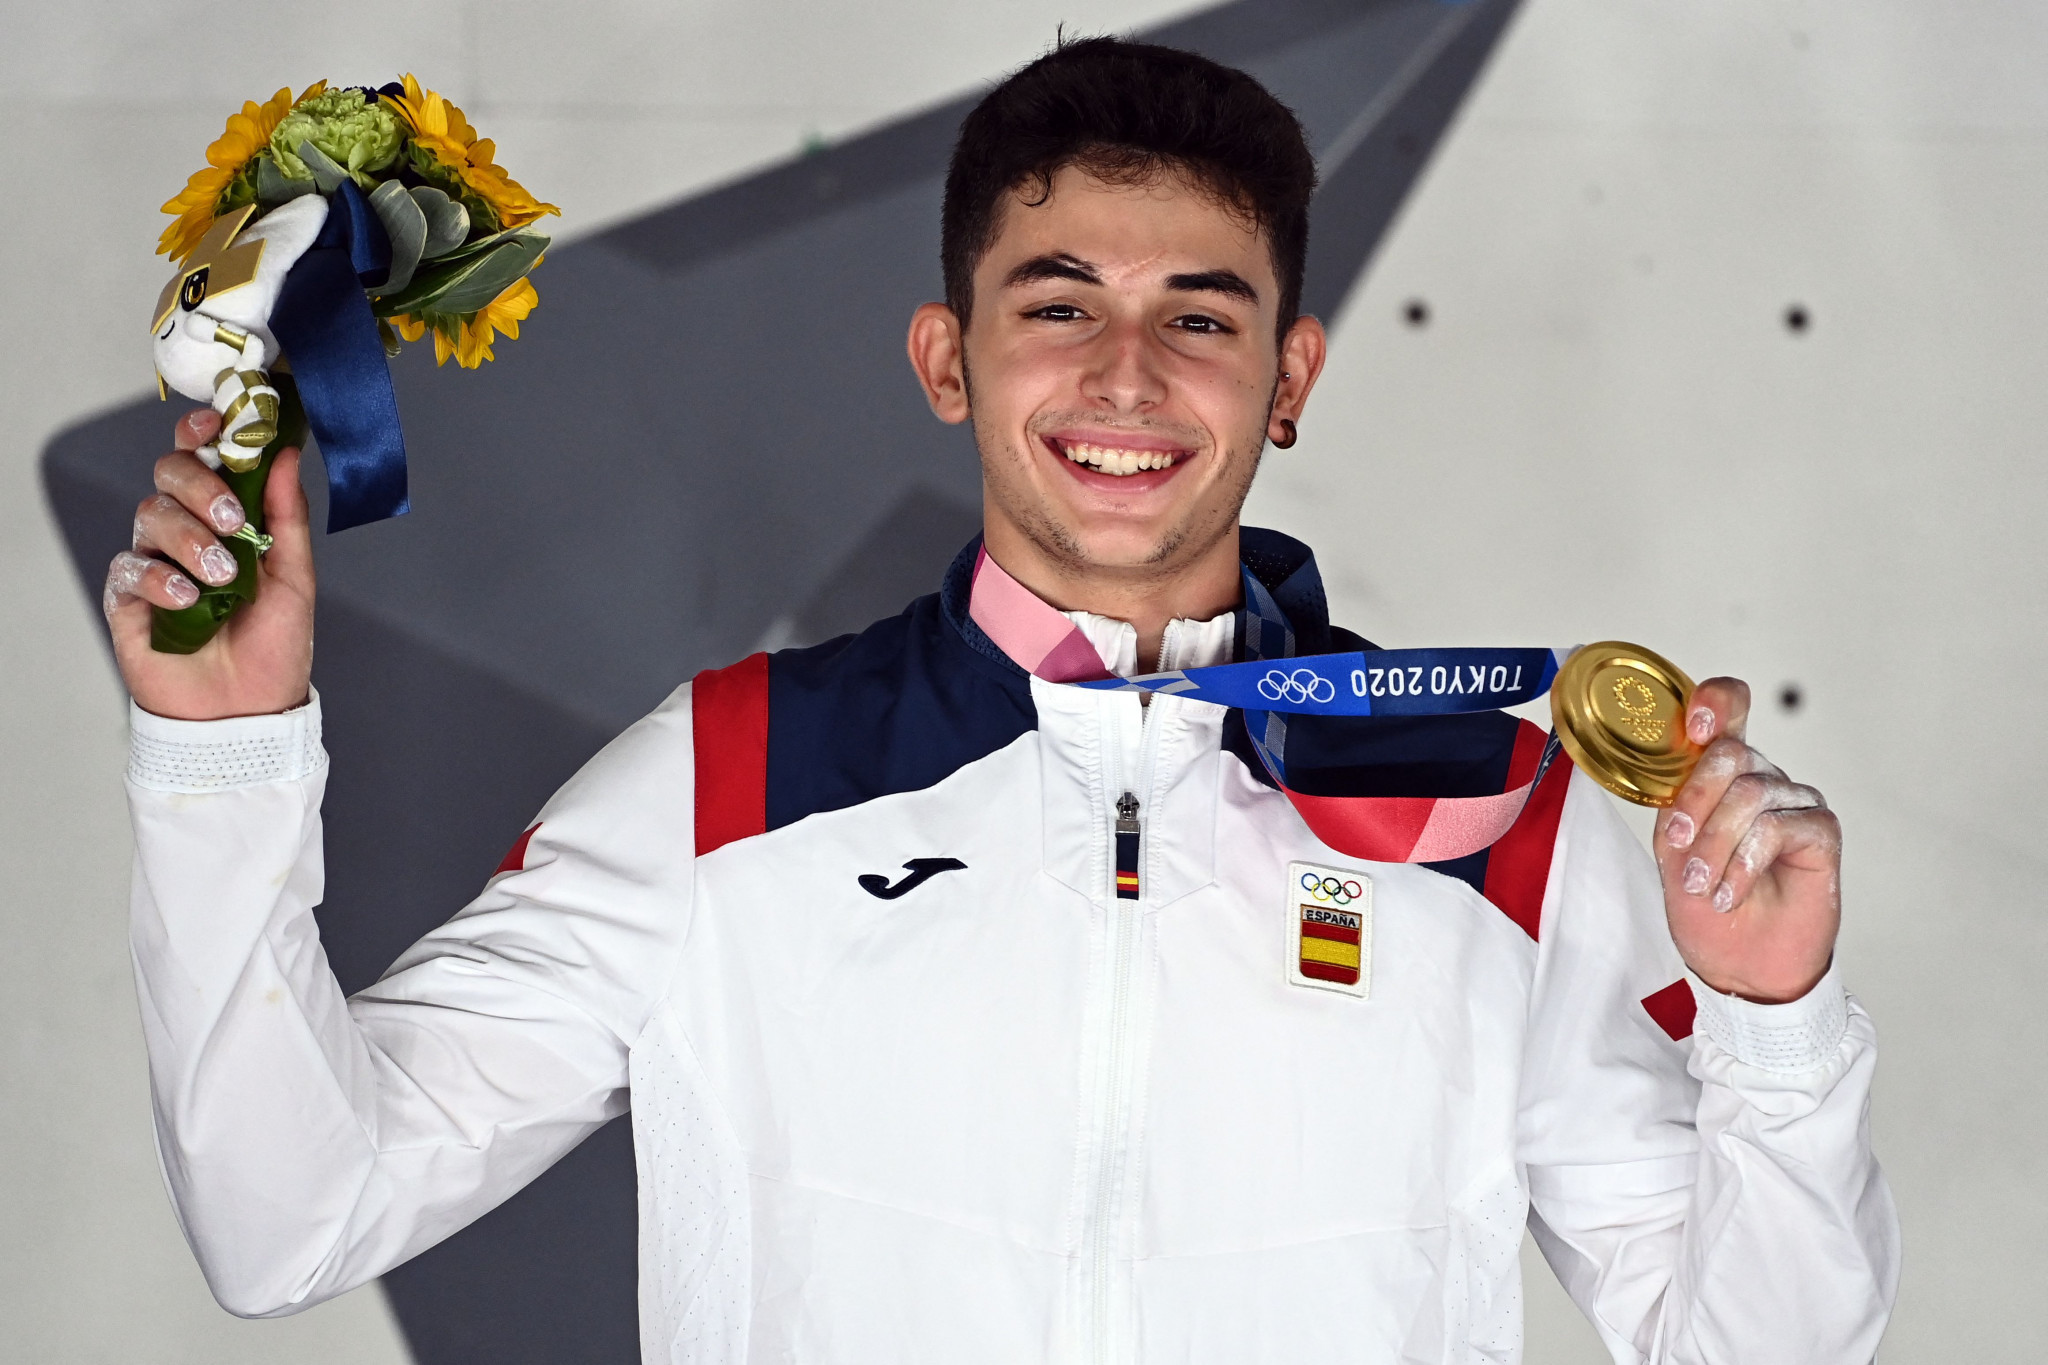 Alberto Ginés López shows off his gold medal after winning the men's combined title ©Getty Images